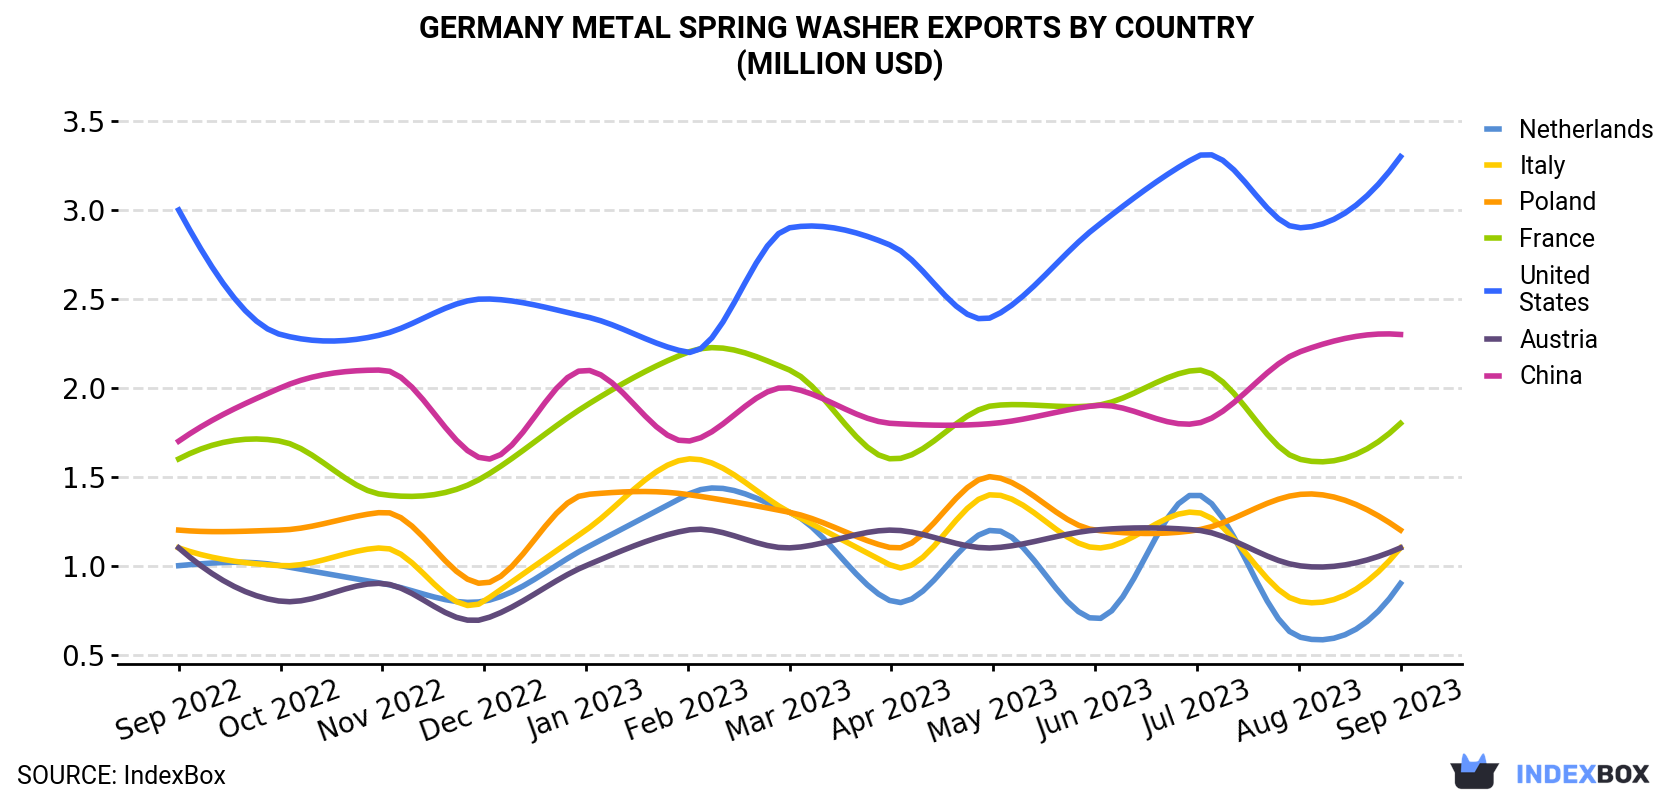 Germany Metal Spring Washer Exports By Country (Million USD)